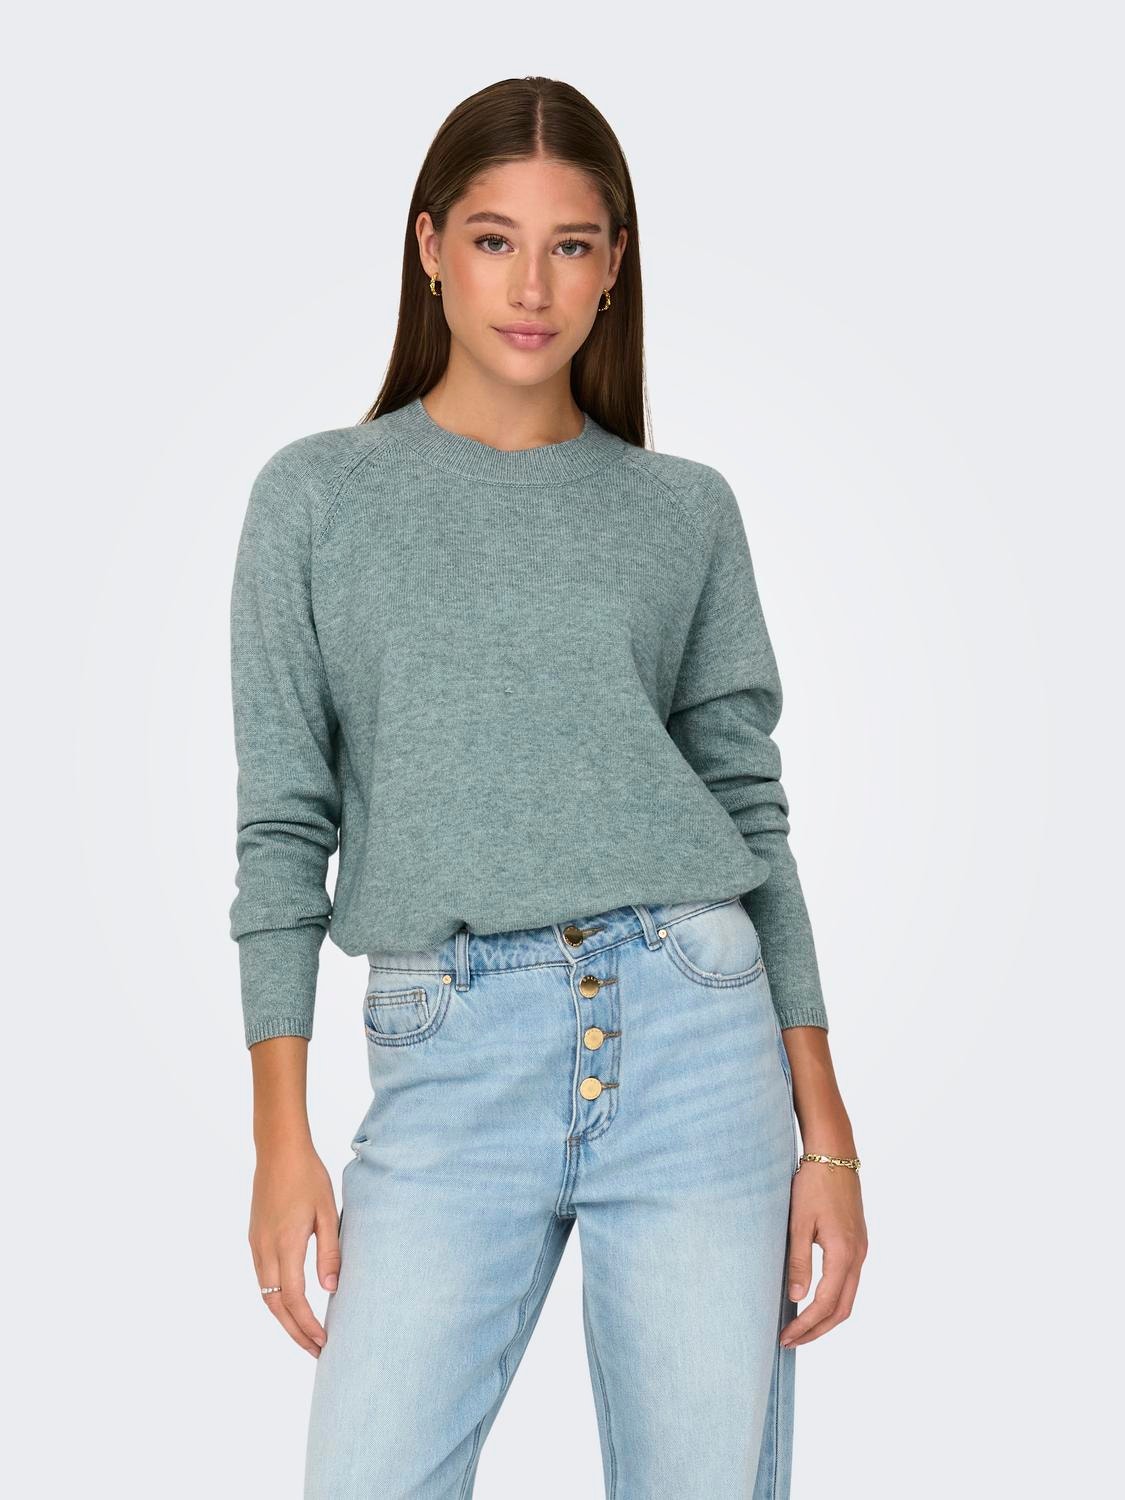 ONLY Knit Fit Round Neck Pullover -Abyss - 15292897